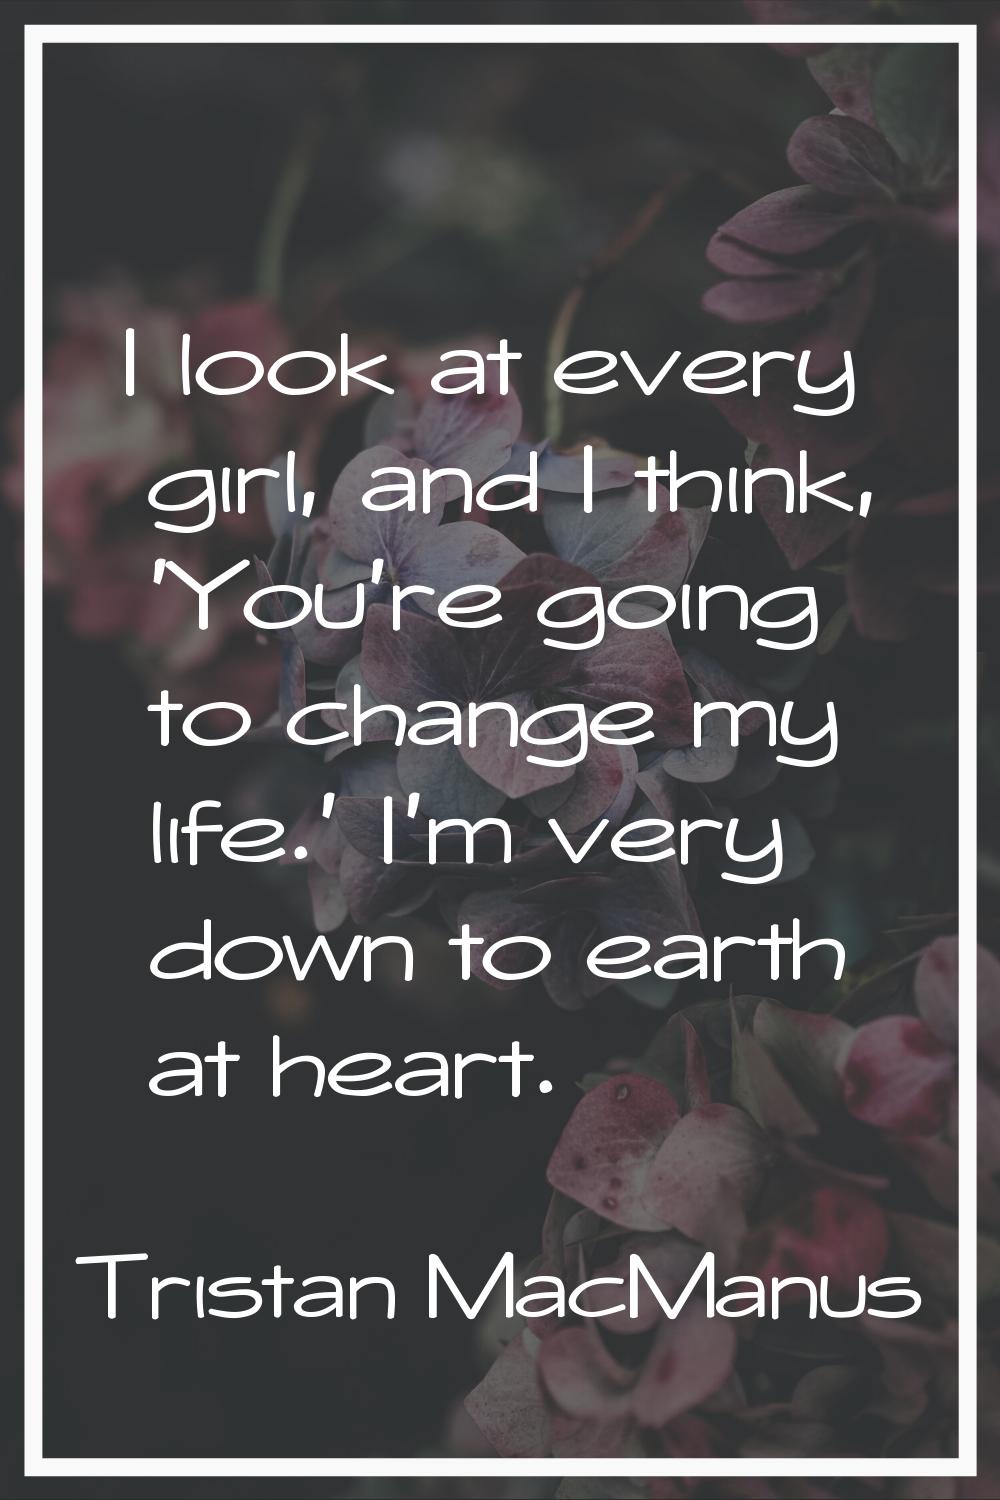 I look at every girl, and I think, 'You're going to change my life.' I'm very down to earth at hear